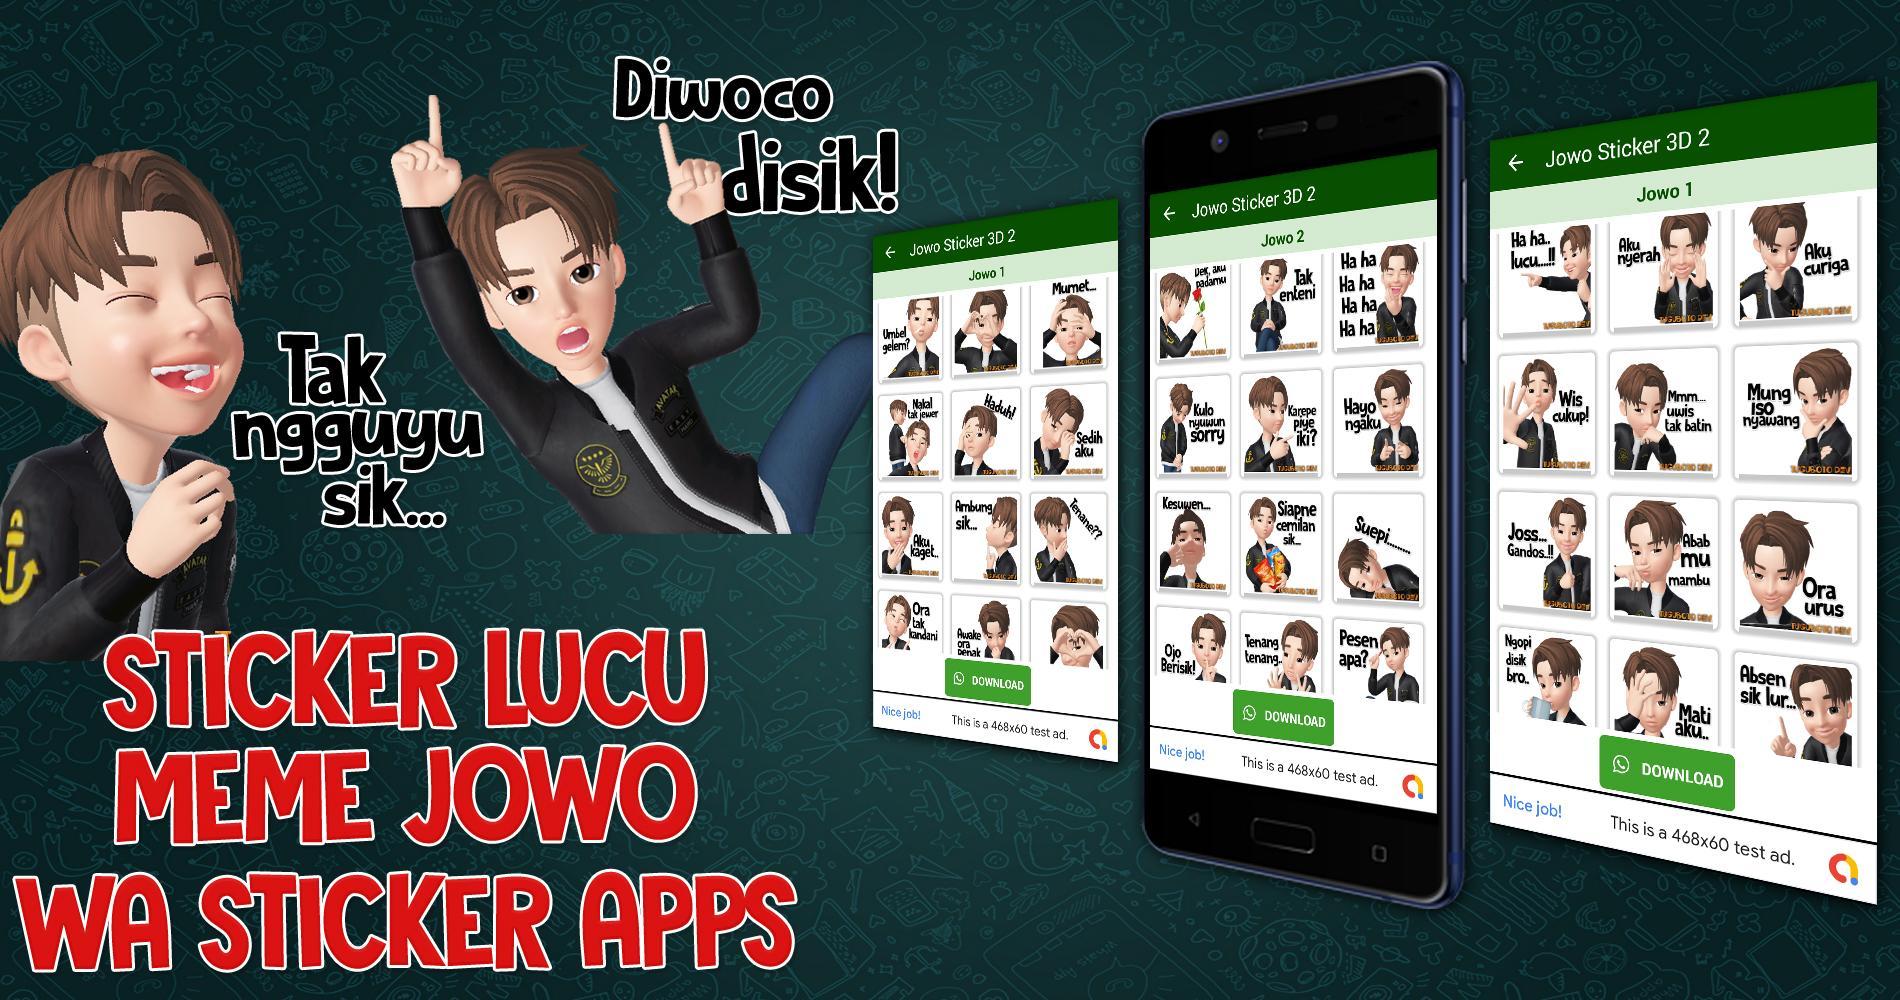 3d Stiker Wa Jawa Lucu Indo Wastickerapps Jowo For Android Apk